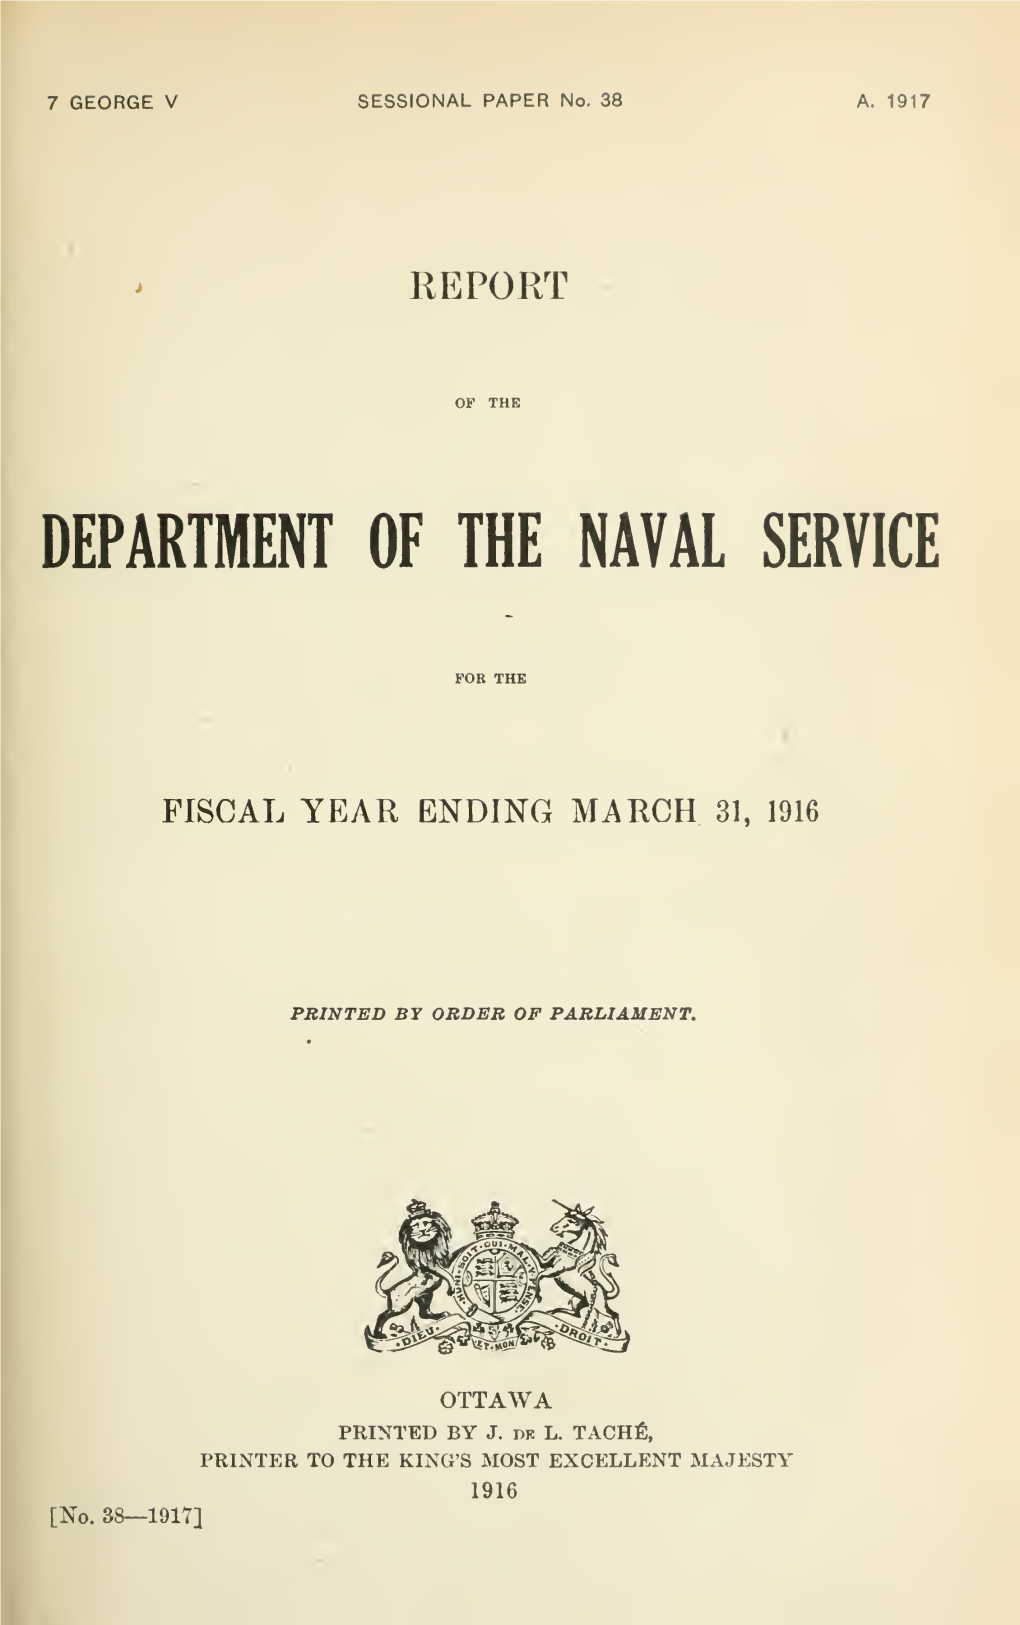 Report of the Department of the Naval Service, for the Fiscal Year Ending